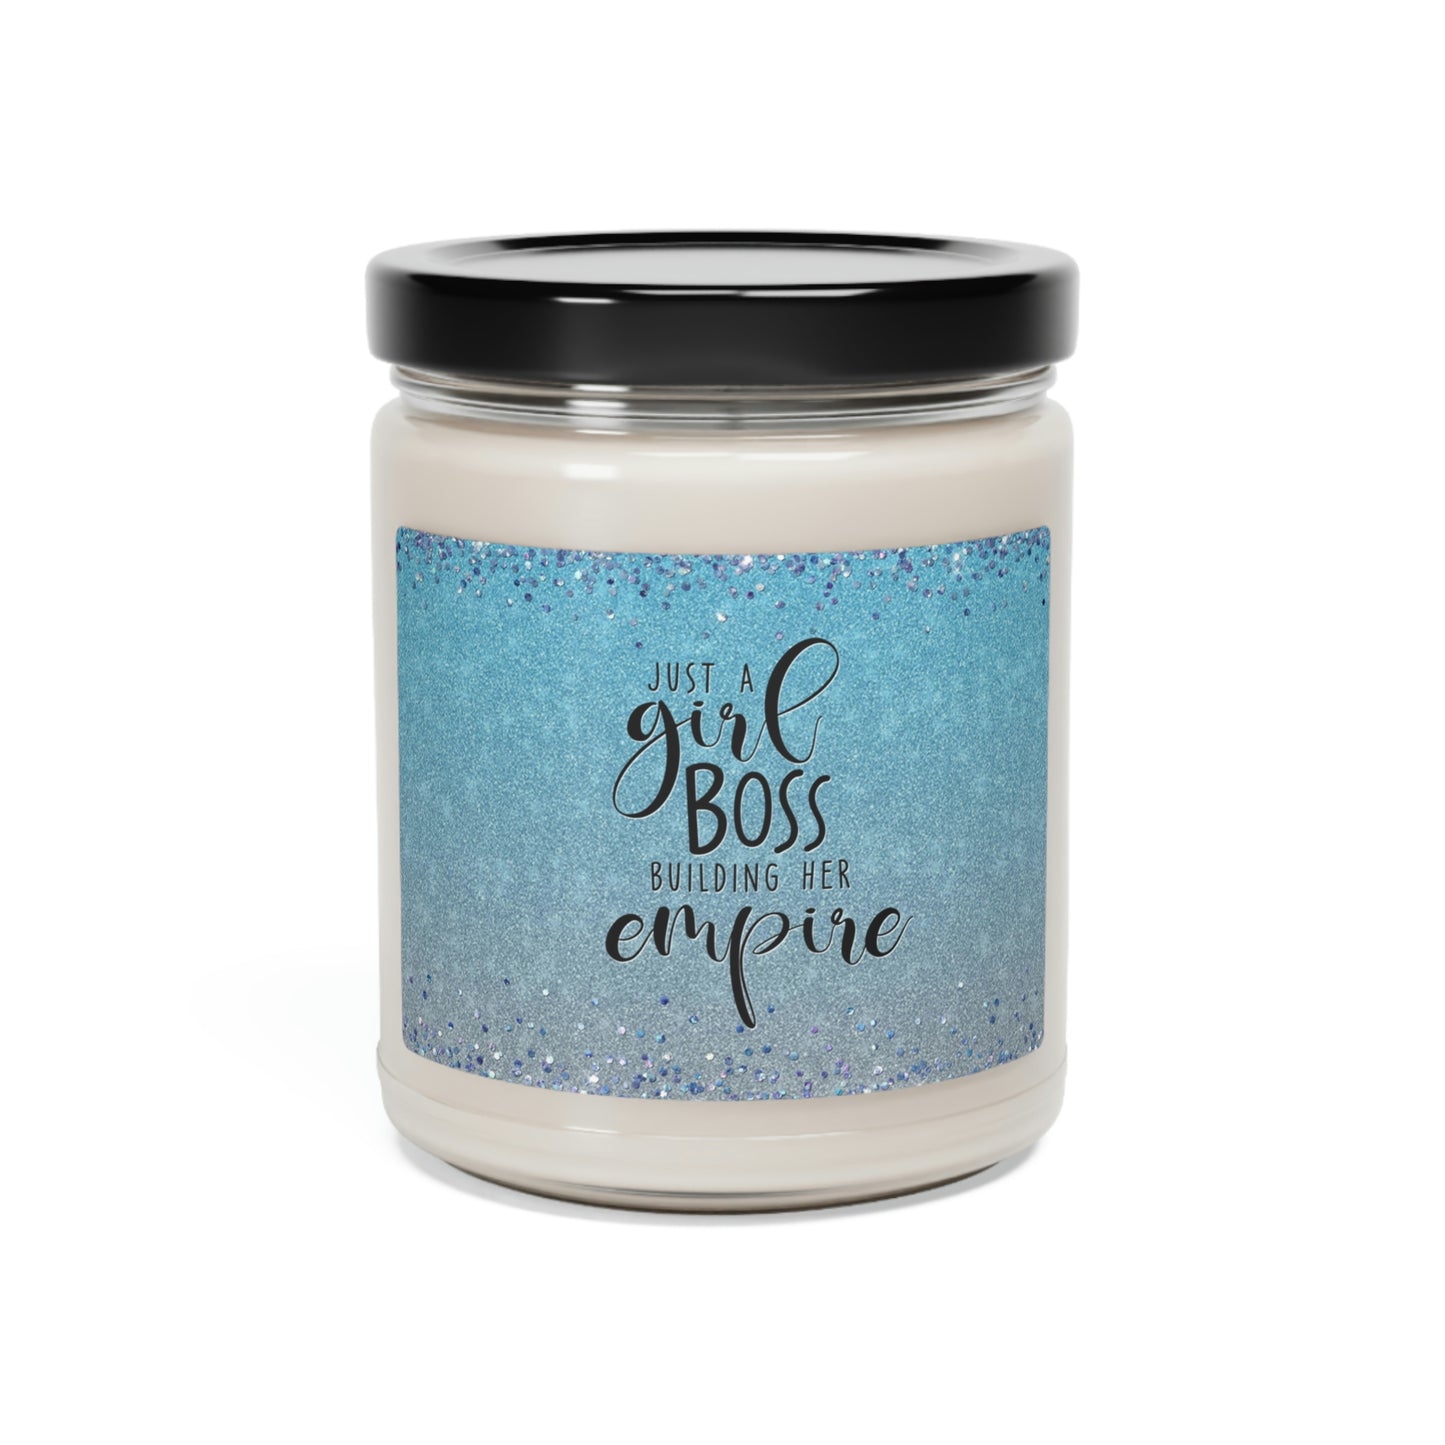 Just A Girl Boss Scented Soy Candle 9oz